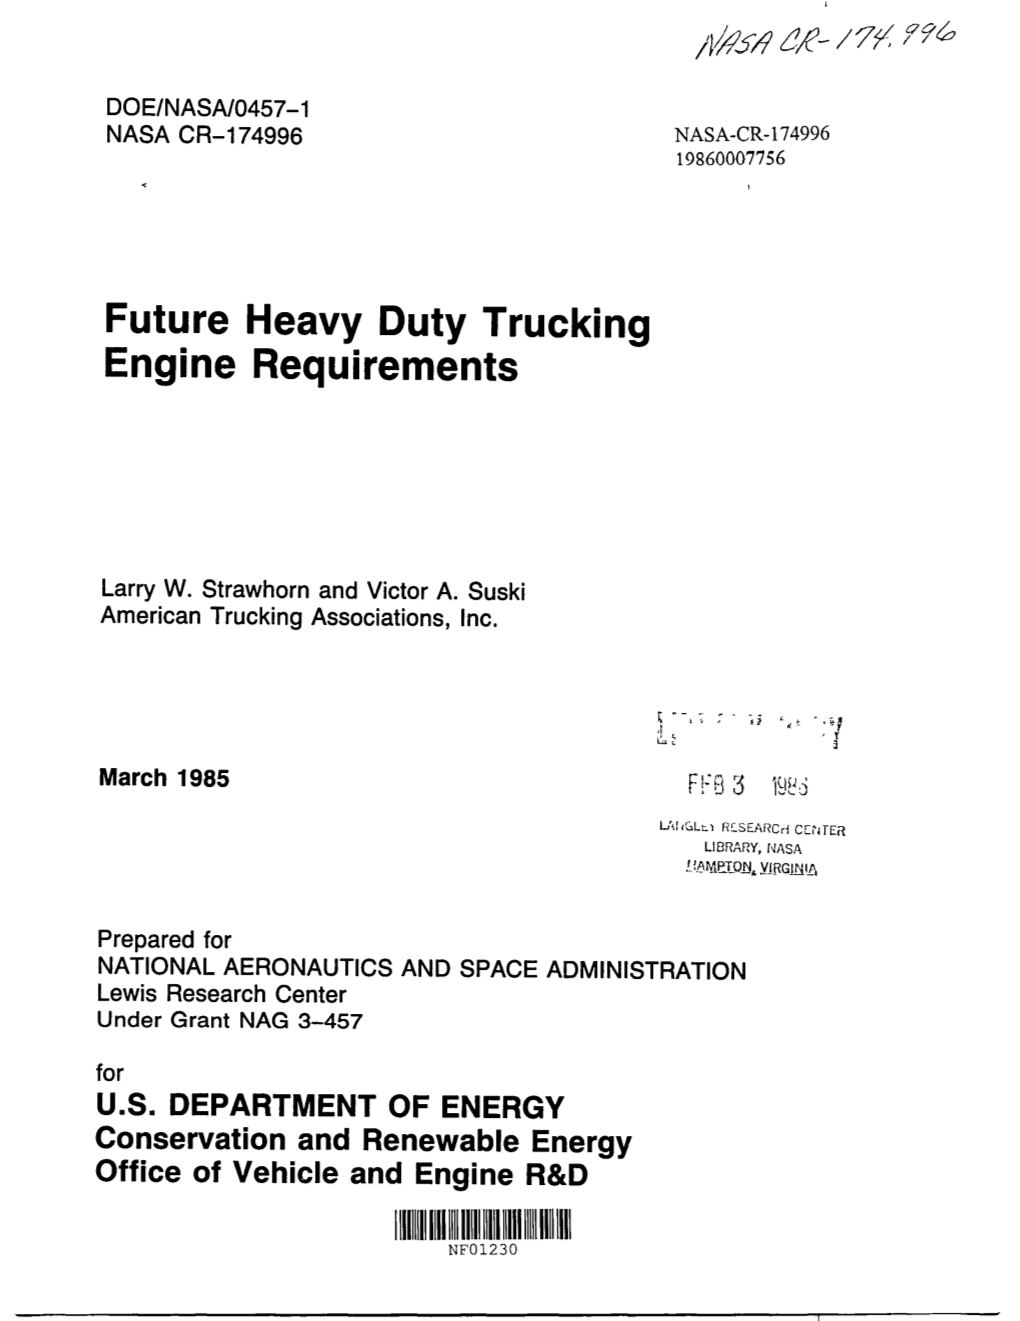 Future Heavy Duty Trucking Engine Requirements